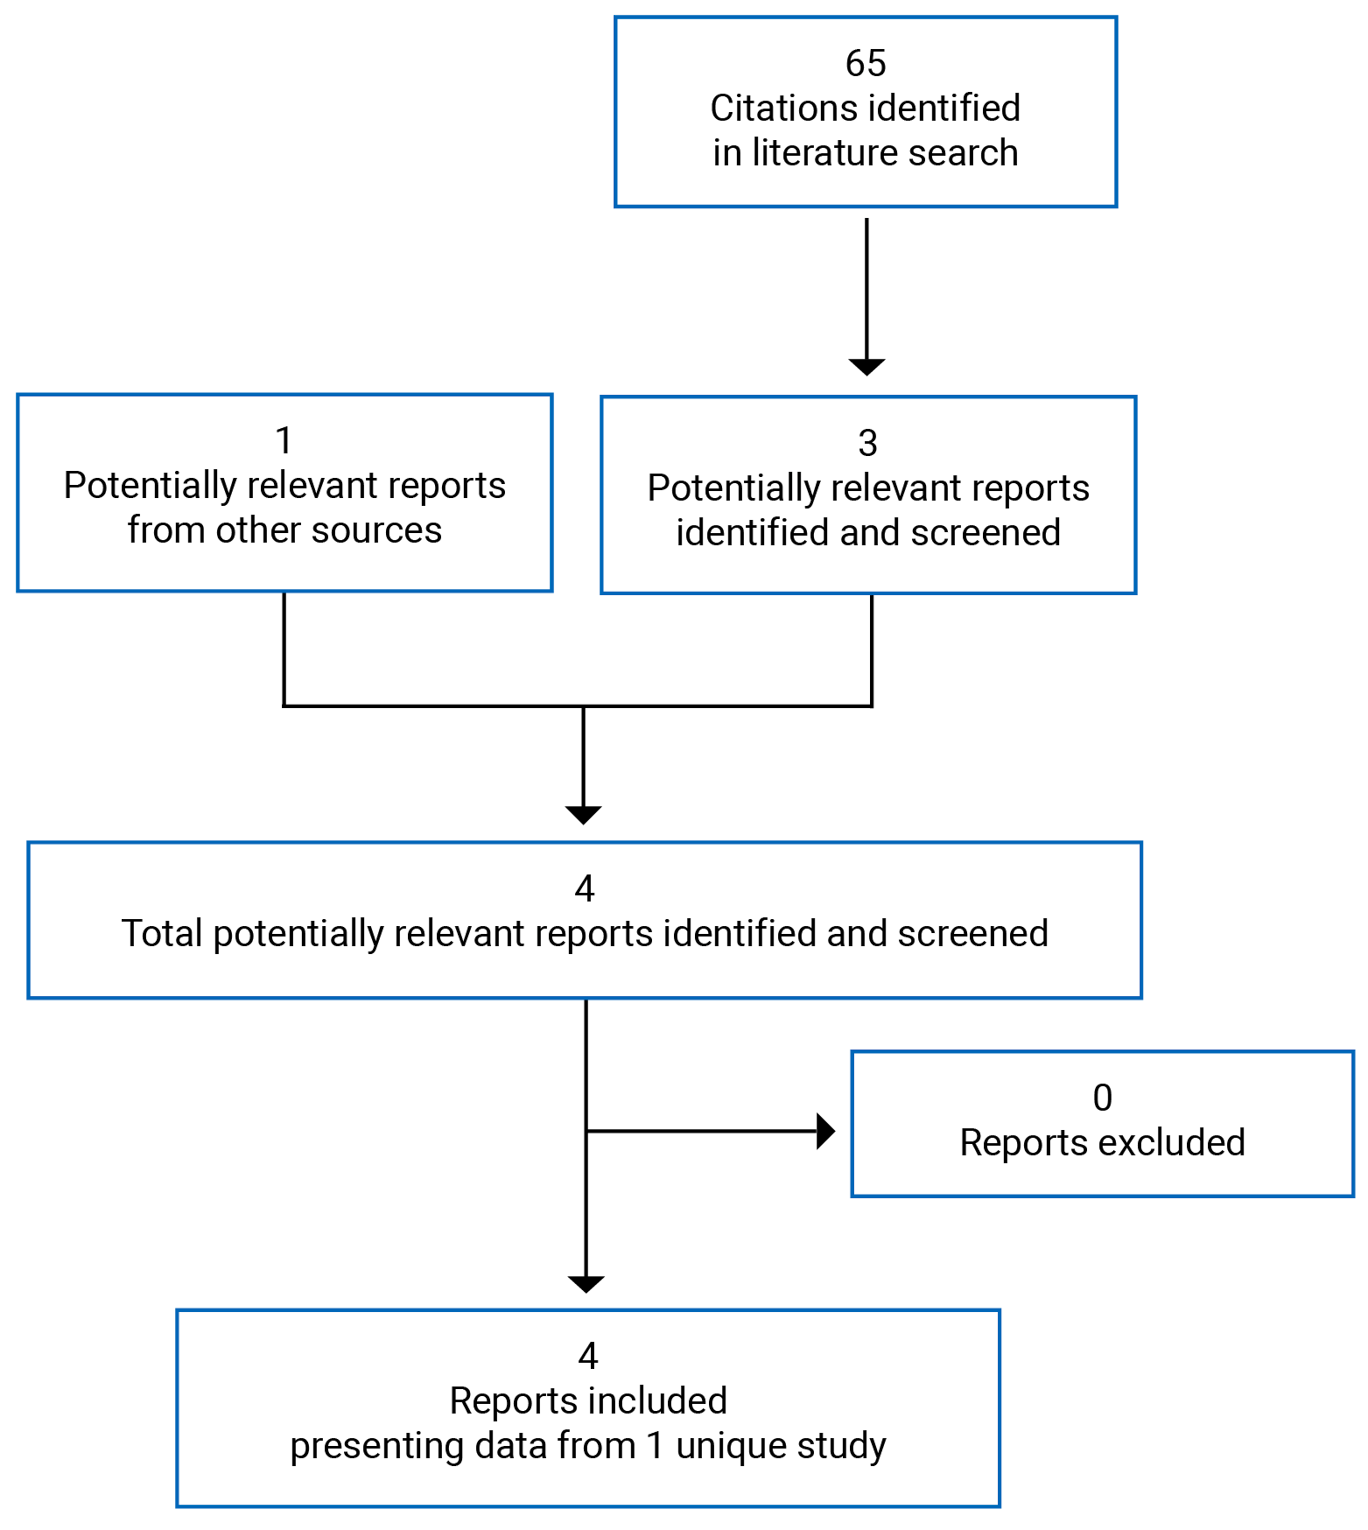 A total of 65 citations were identified in the literature search, of which 3 potentially relevant reports were identified. One additional potentially relevant report was identified from other sources. Of the 4 potentially relevant full-text reports retrieved for scrutiny, none were excluded. Finally, 4 reports presenting data from 1 unique study were included in the review.